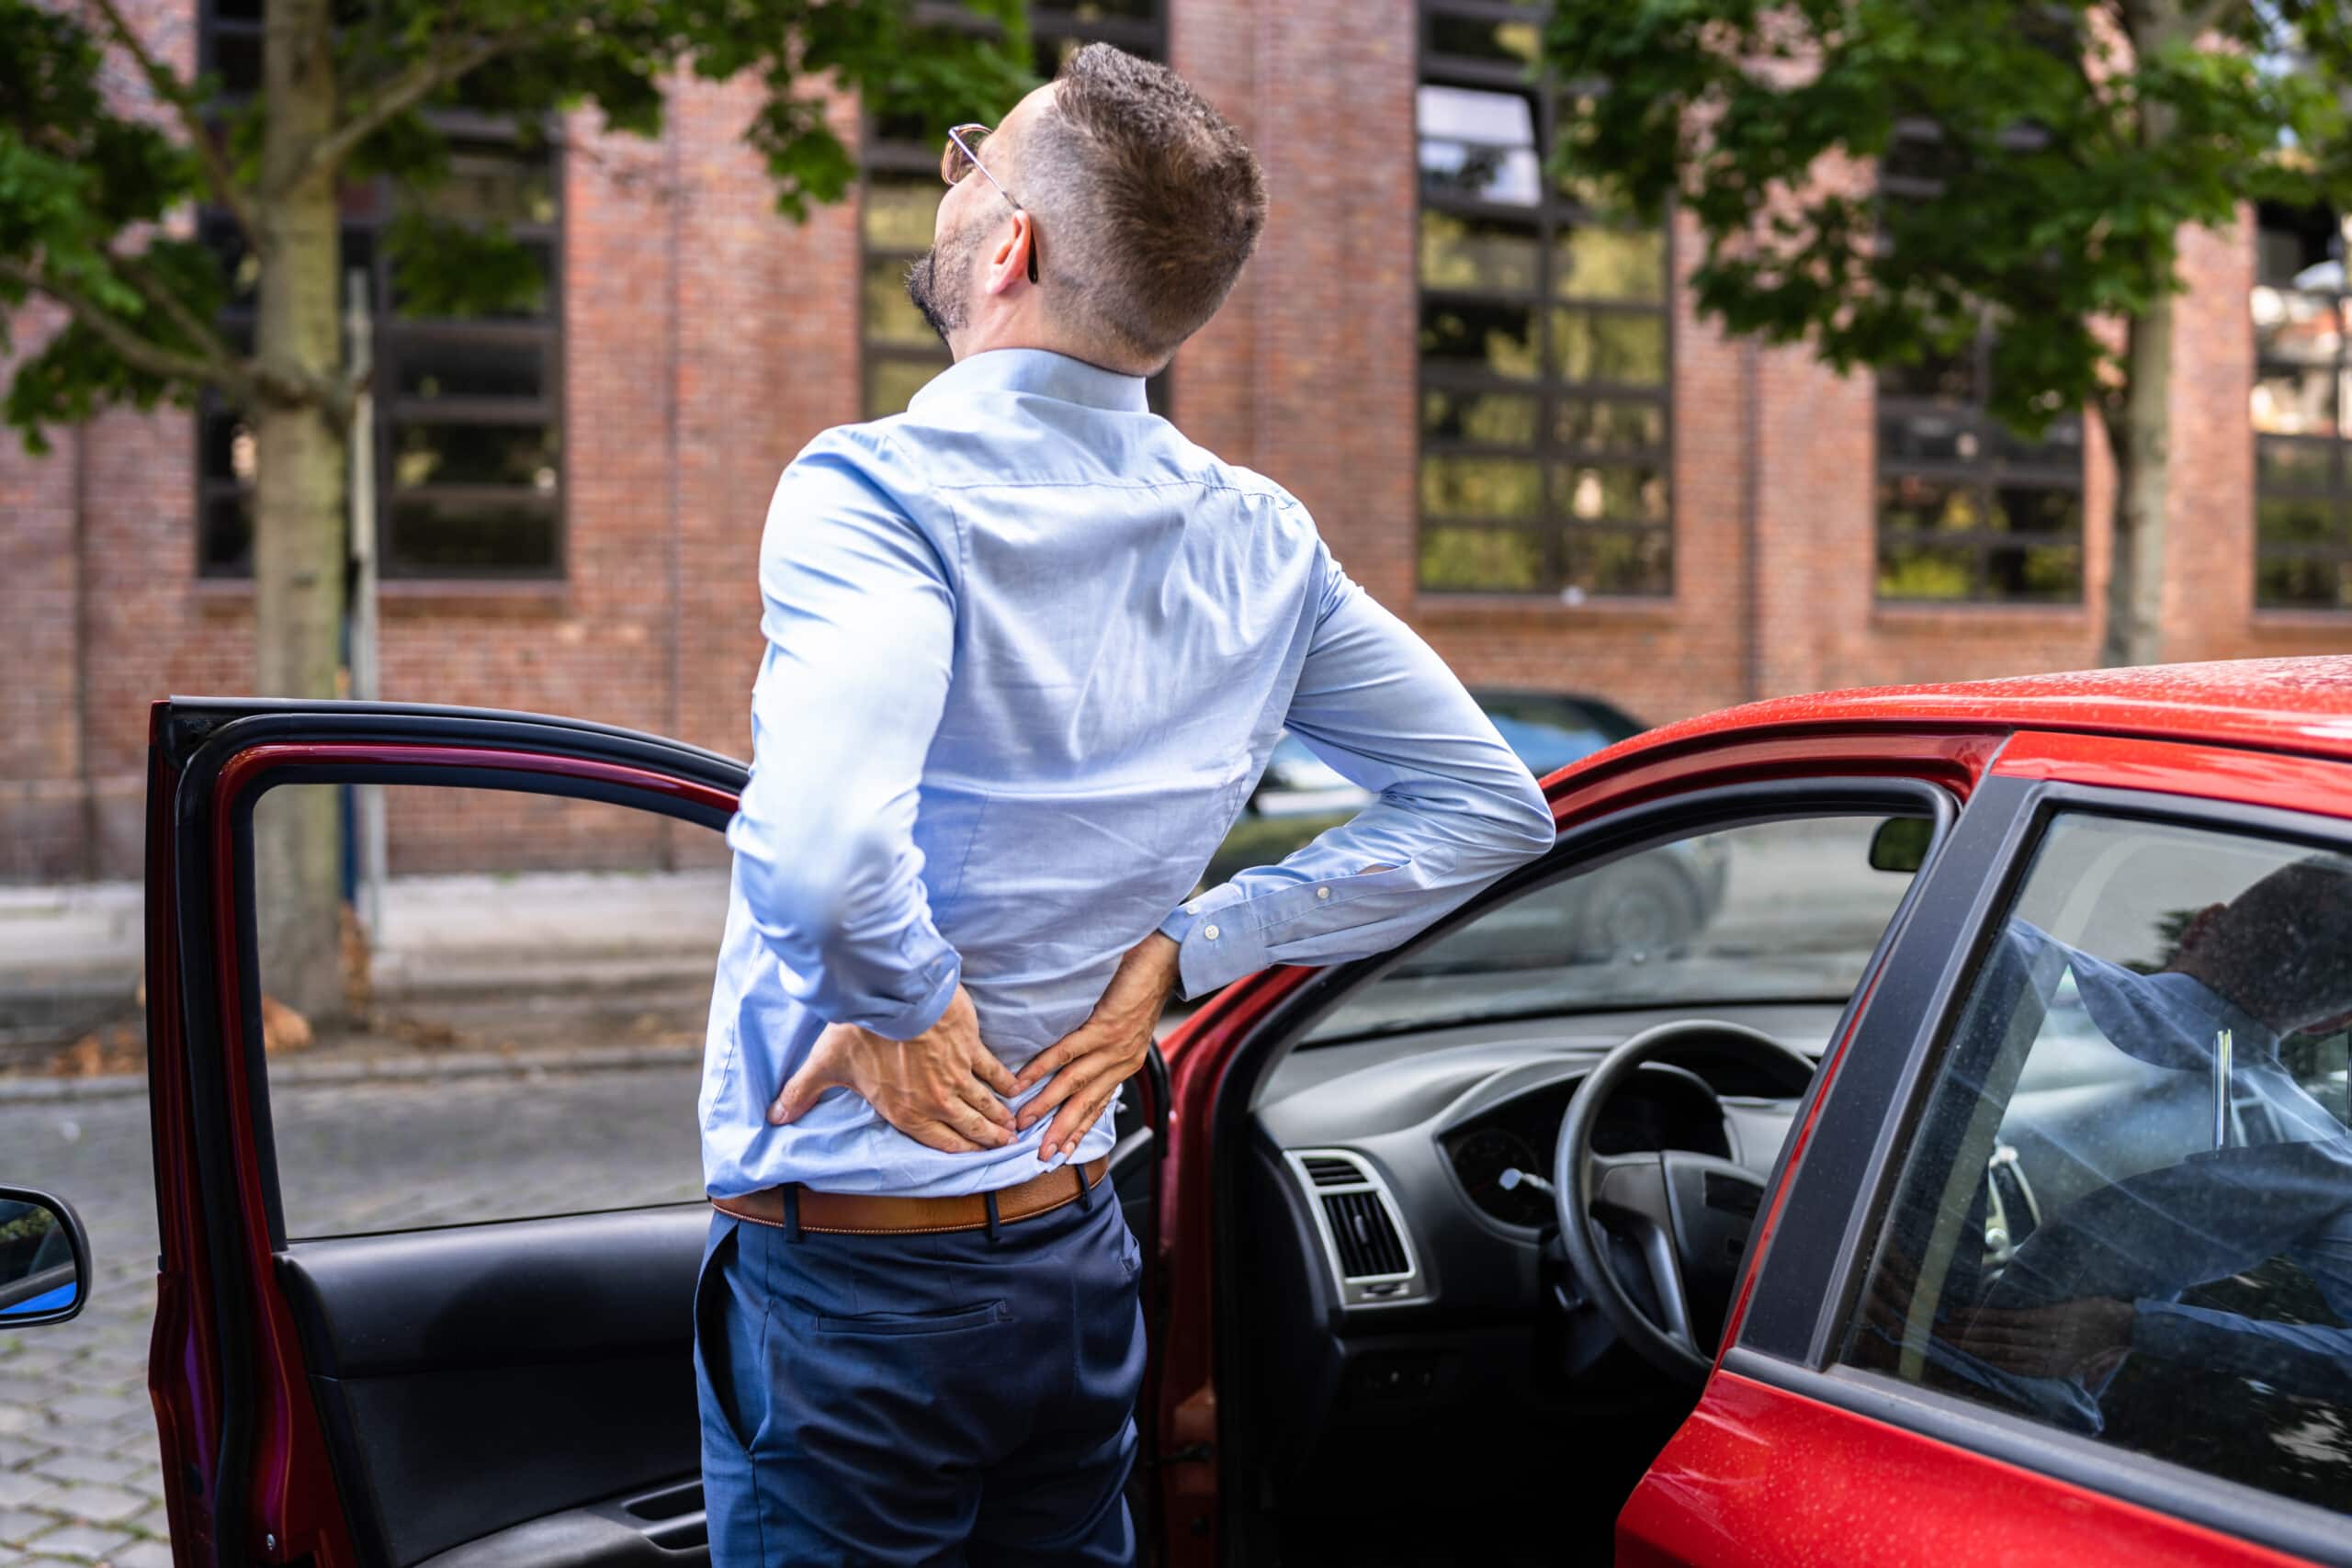 Tips For Managing Chronic Pain Related To Spinal Injuries After A Vehicular Accident